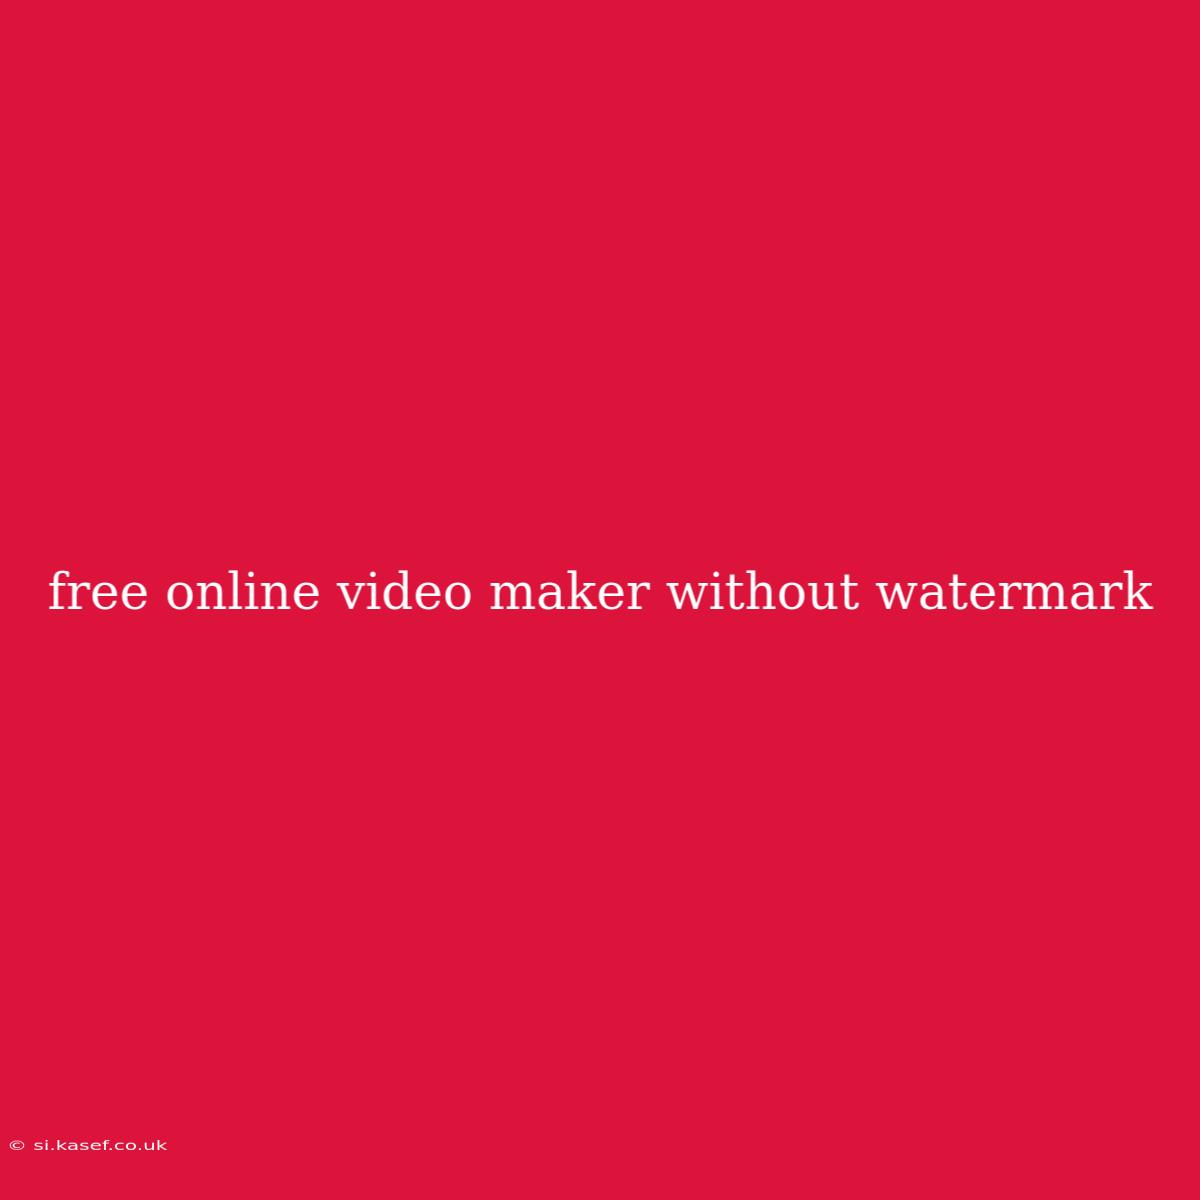 Free Online Video Maker Without Watermark